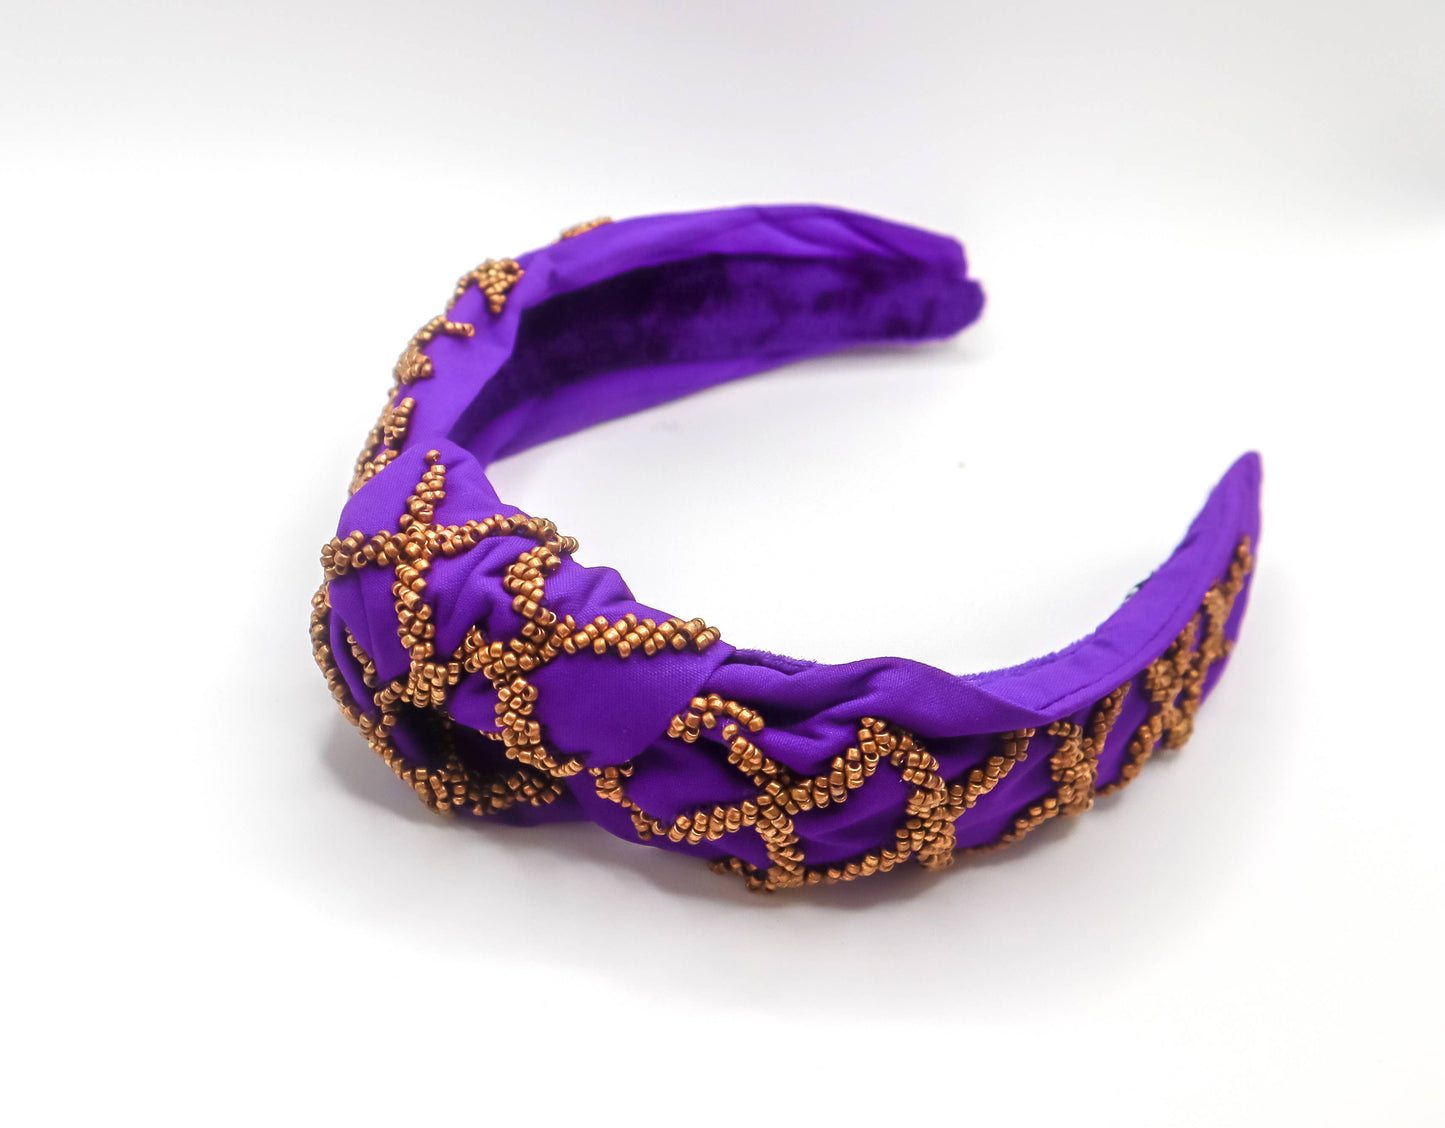 A Bash Game Day Beaded Football Headband in Purple with Multiple Color Options, Width: 6.5", Height: 2.5" adorned with gold beading perfect for football game day festivities.